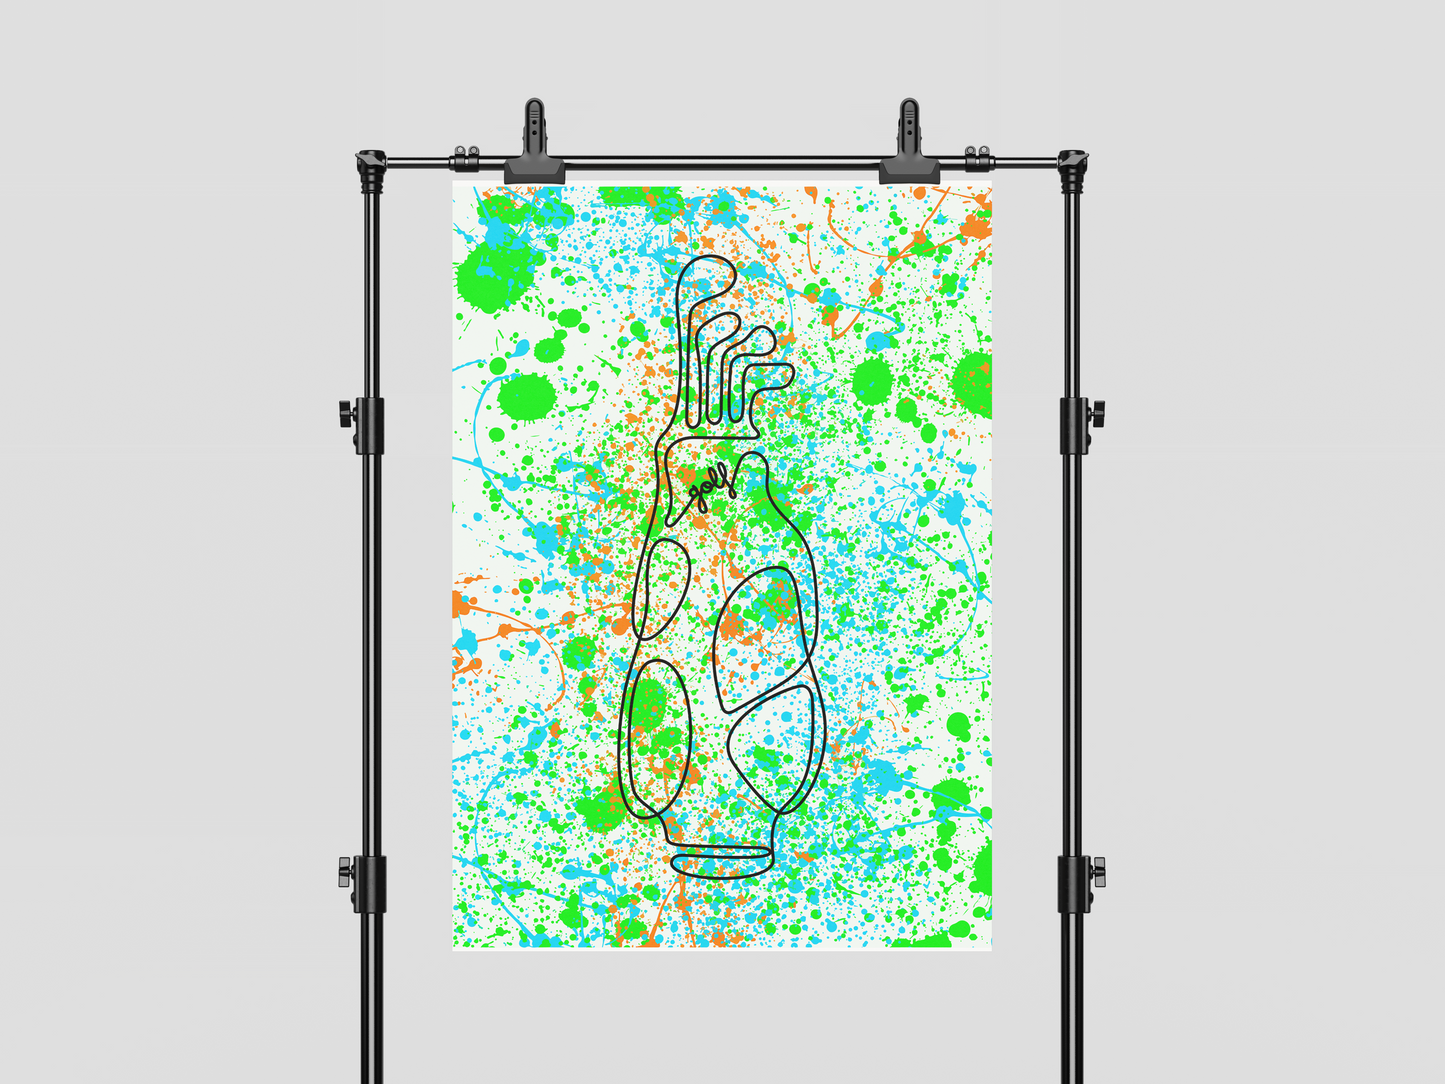 Golf Poster of a Golf Bag in a one-line design with color splatter